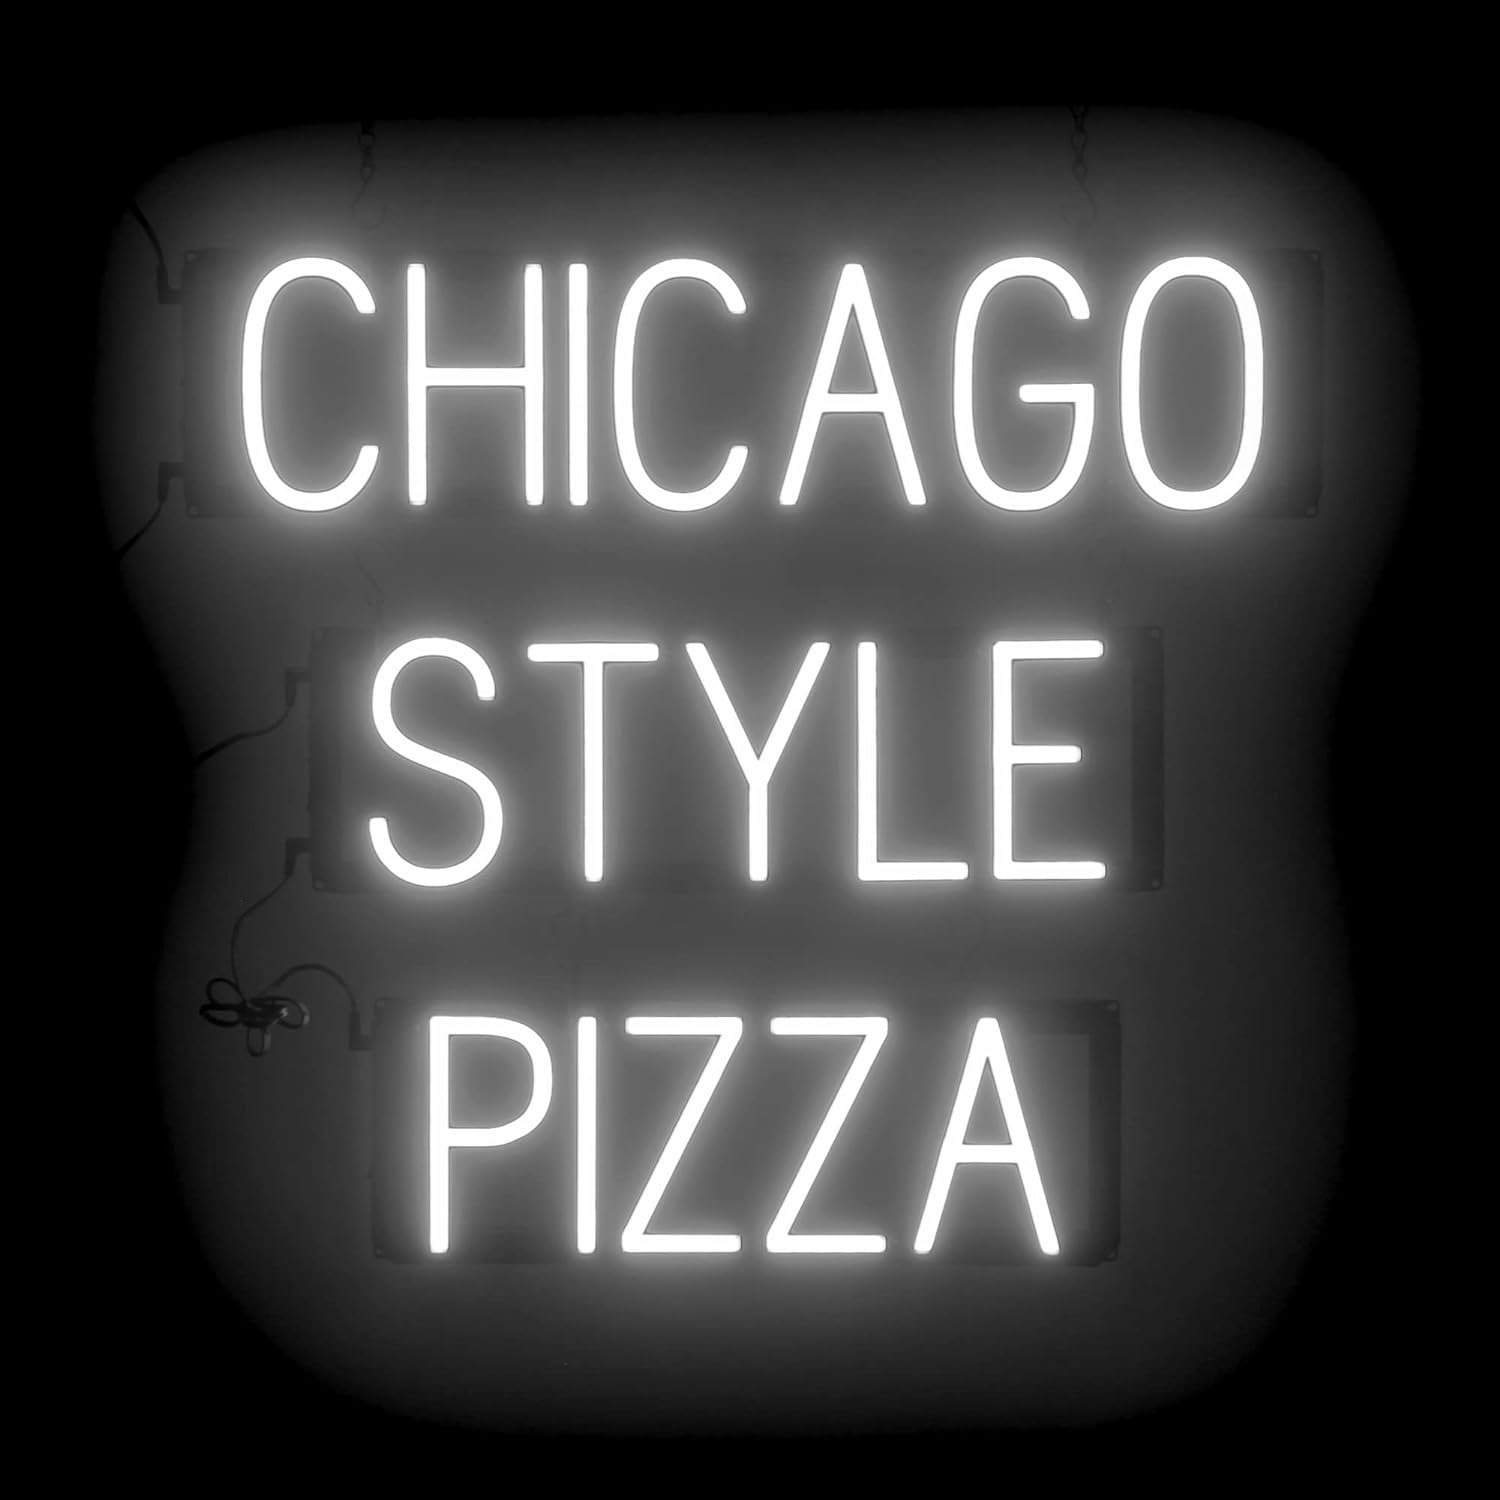 CHICAGO STYLE PIZZA LED Sign - White | Neon Signs for Pizzerias | Pizzeria Sign 